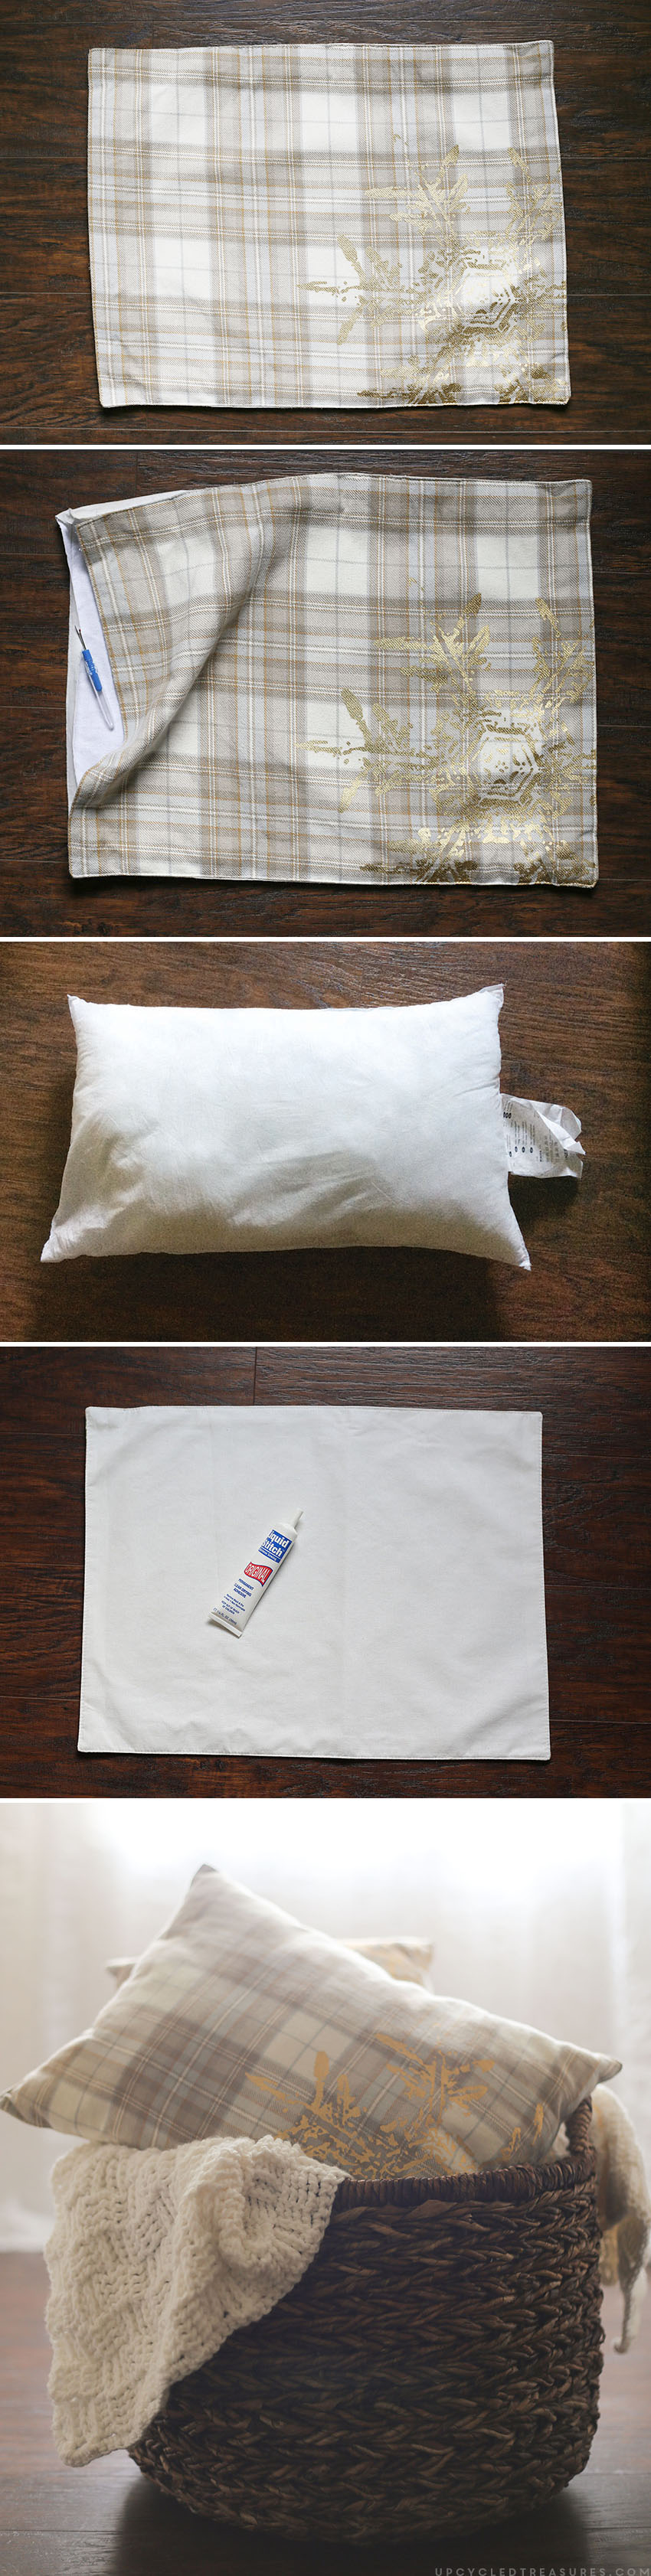 Looking for affordable holiday pillows? See how easy it is to create these no sew DIY holiday placemat pillows in a matter of minutes! UpcycledTreasures.com